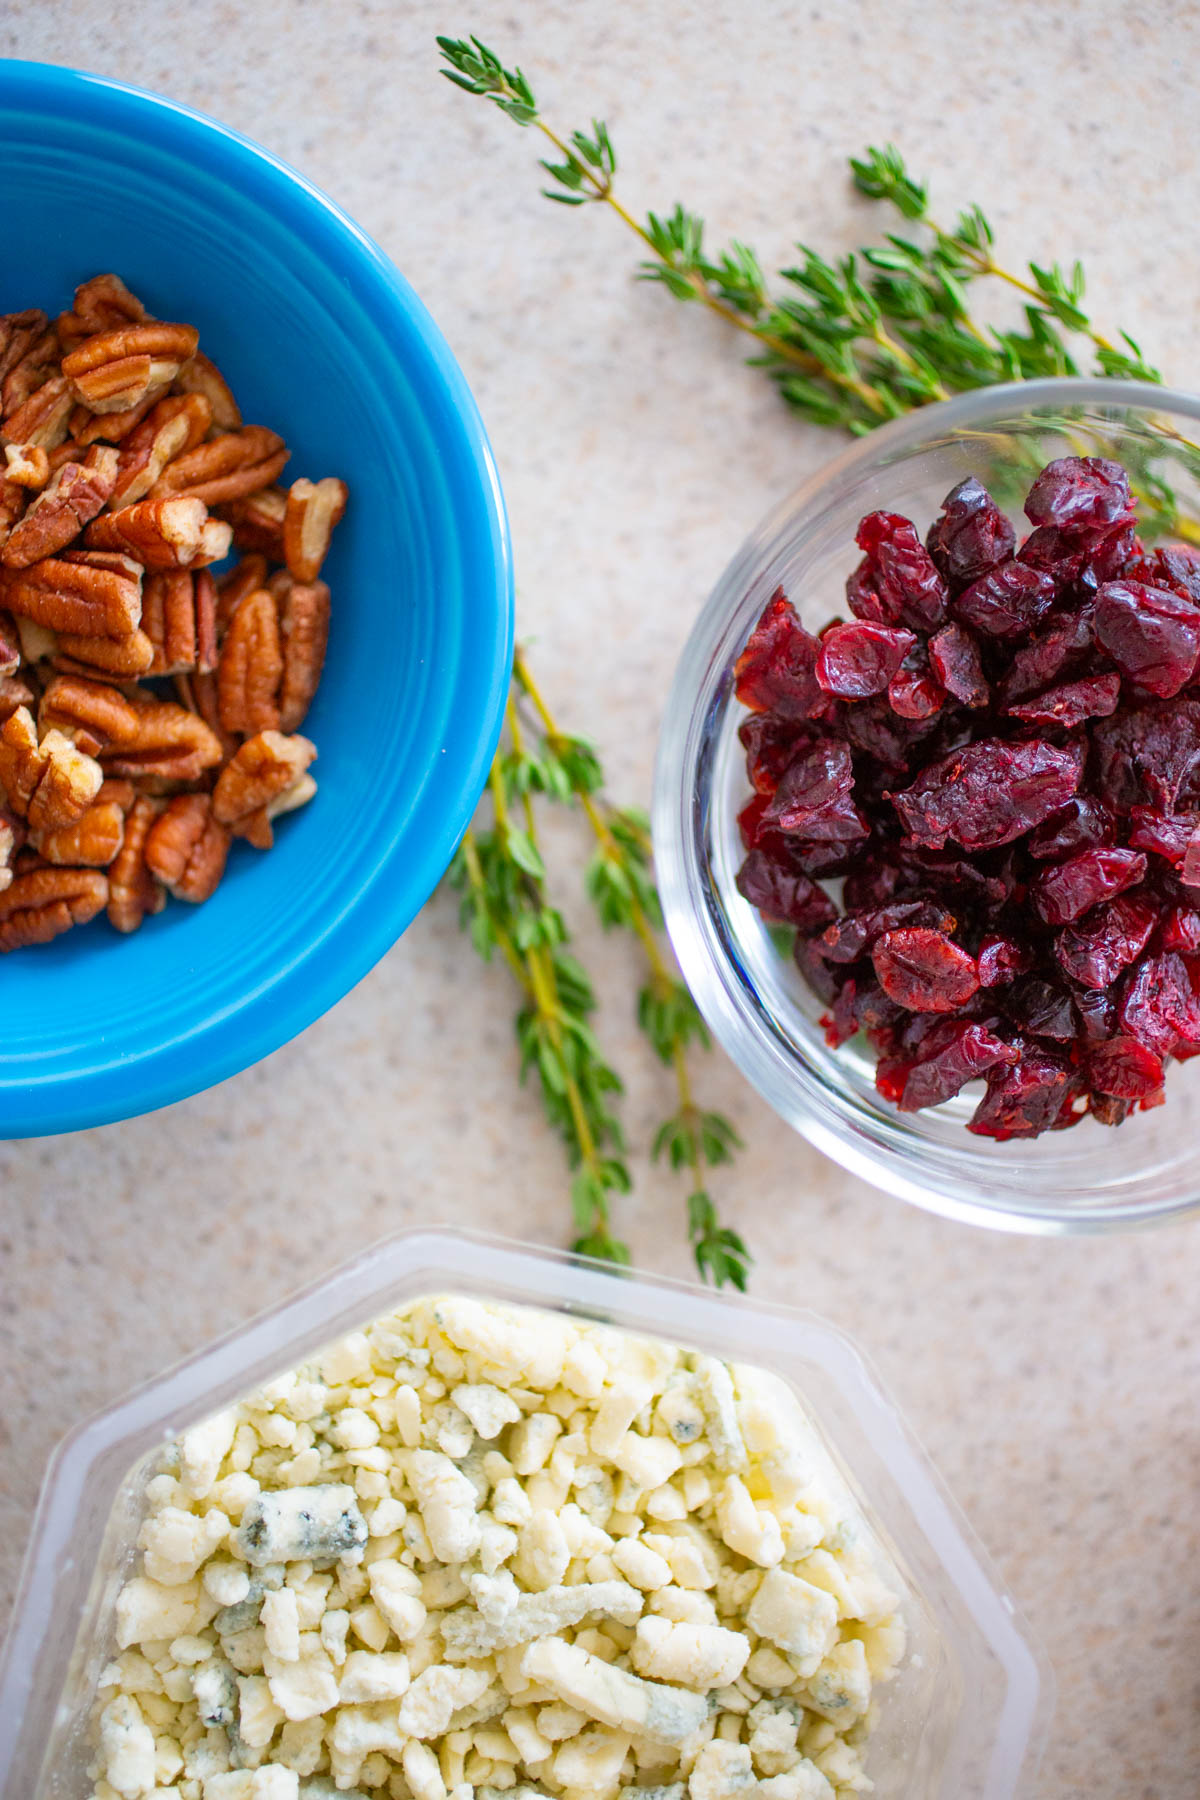 The pecans, cranberries, and crumbled blue cheese are on the counter next to fresh thyme.